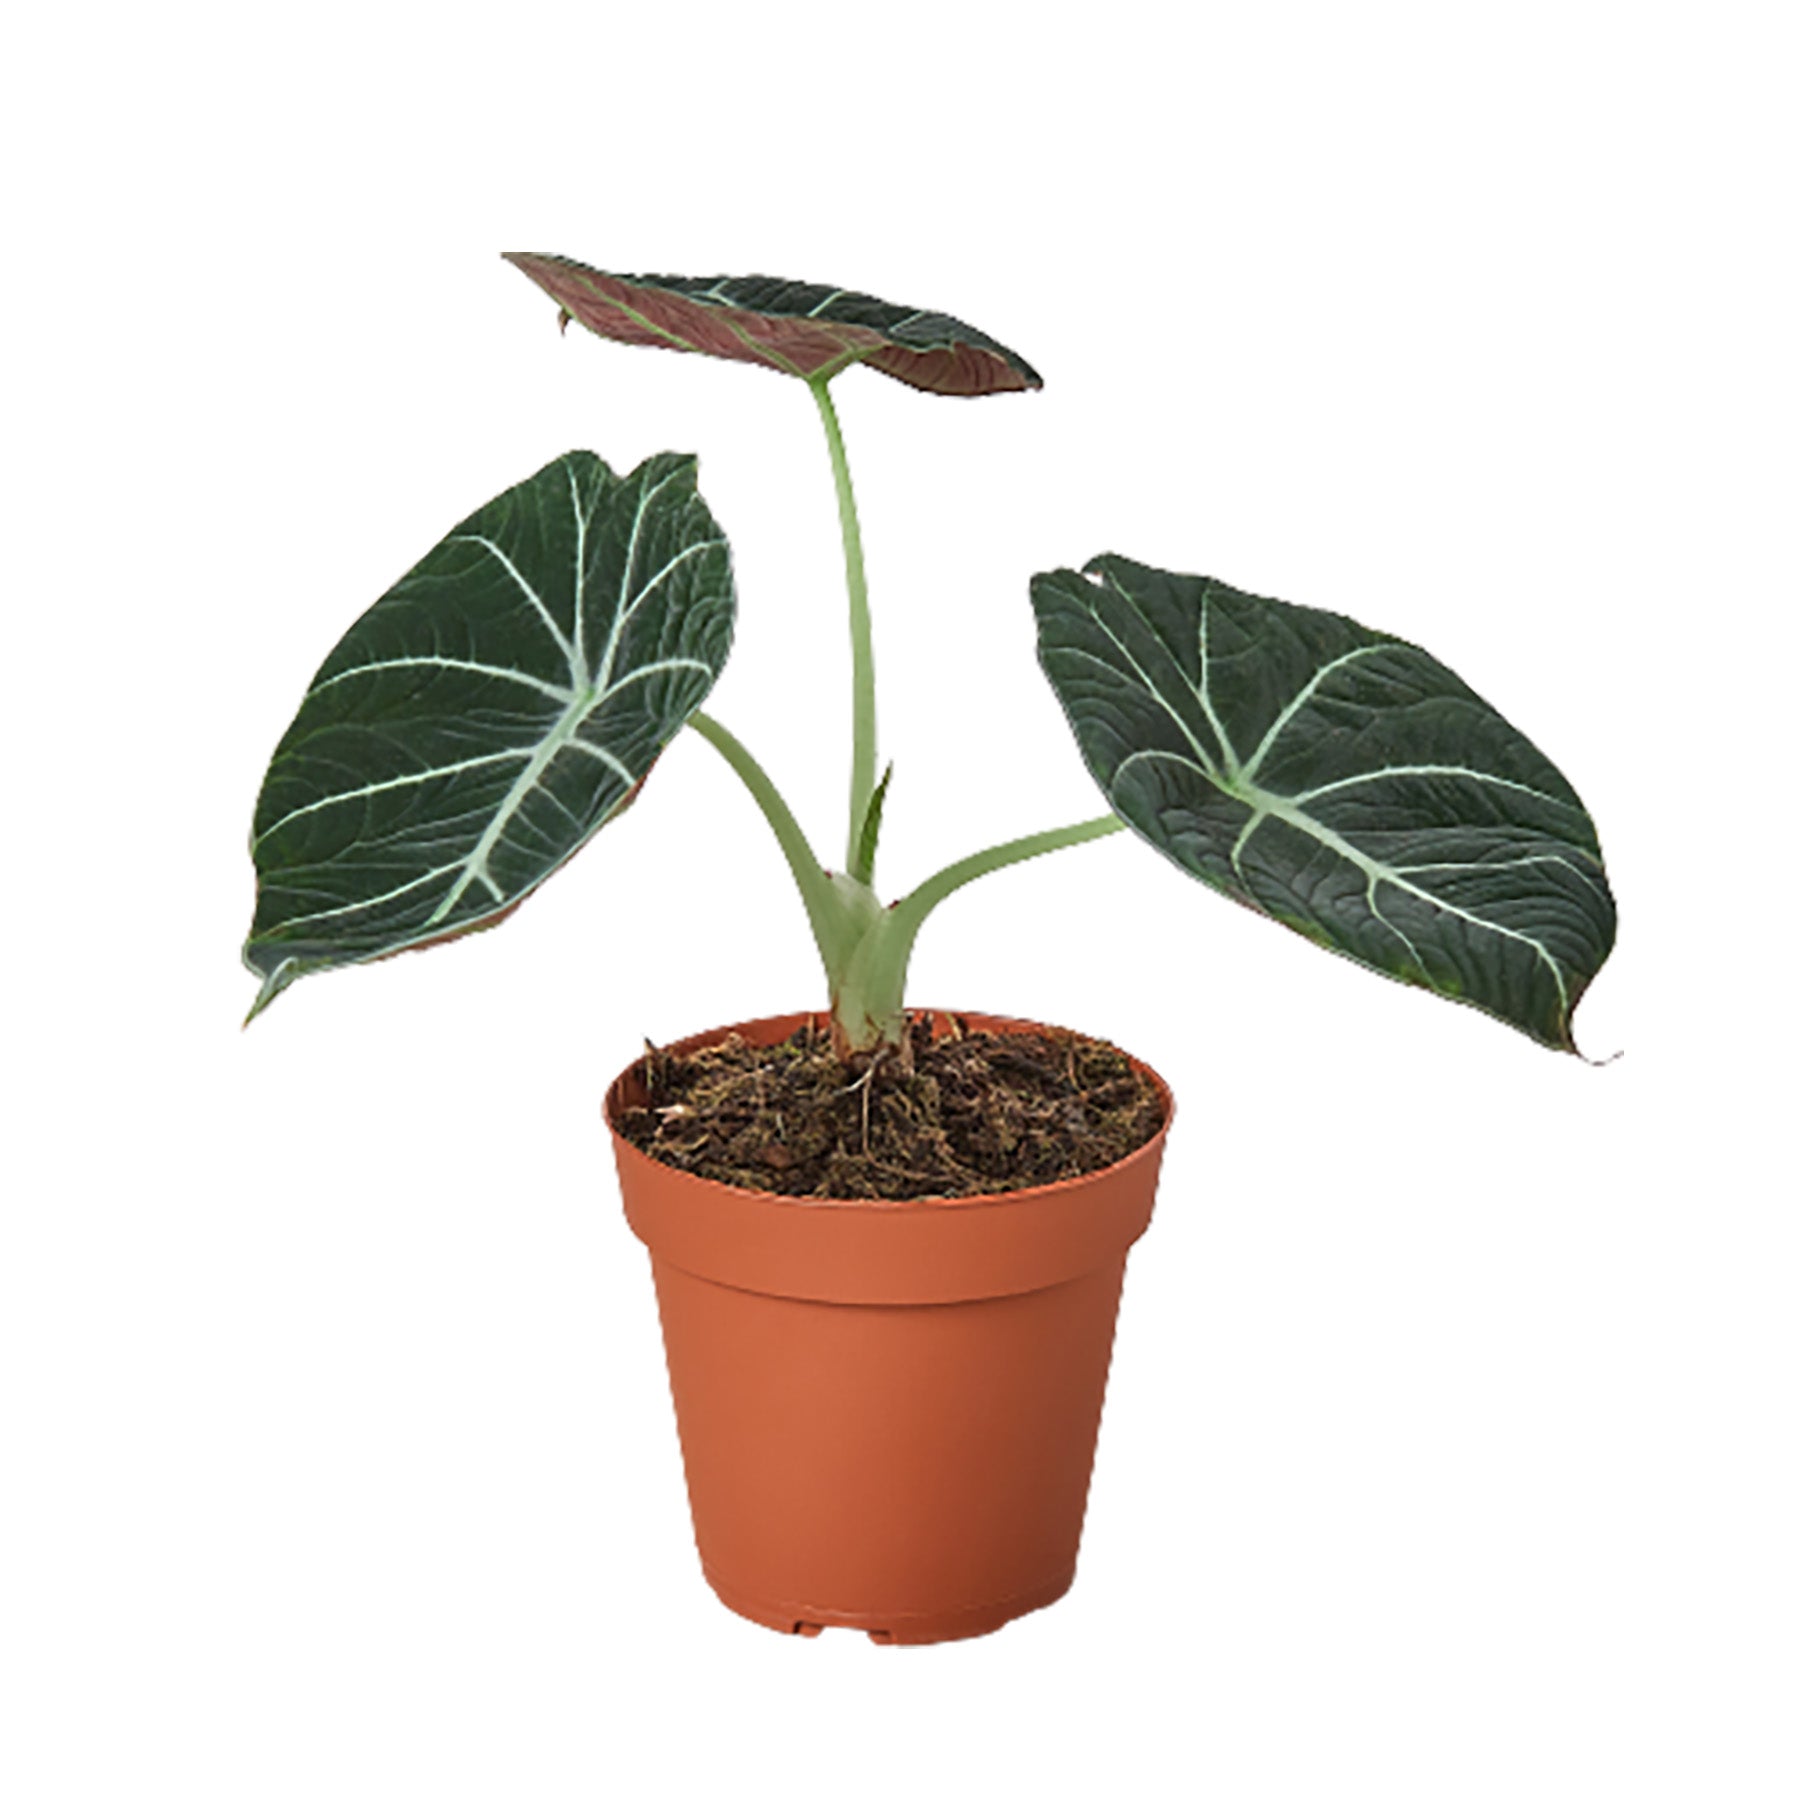 A plant in a pot on a white background, available at the best garden nursery near me.